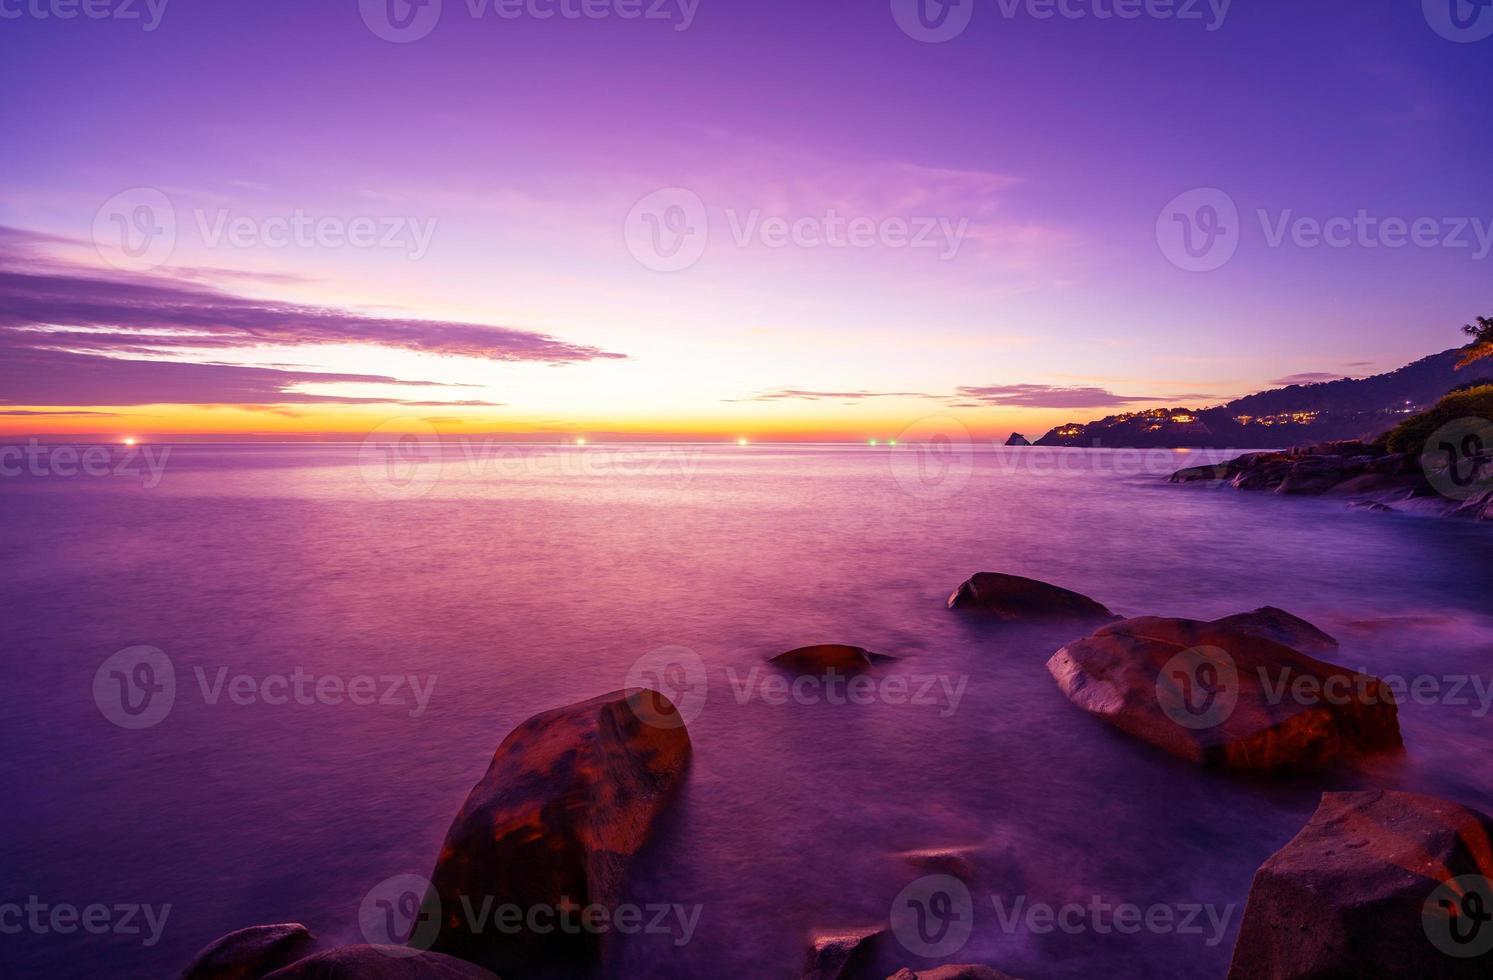 Landscape Long exposure of majestic clouds in the sky sunset or sunrise over sea with reflection in the tropical sea.Beautiful cloudscape scenery.Amazing light of nature Landscape nature background photo